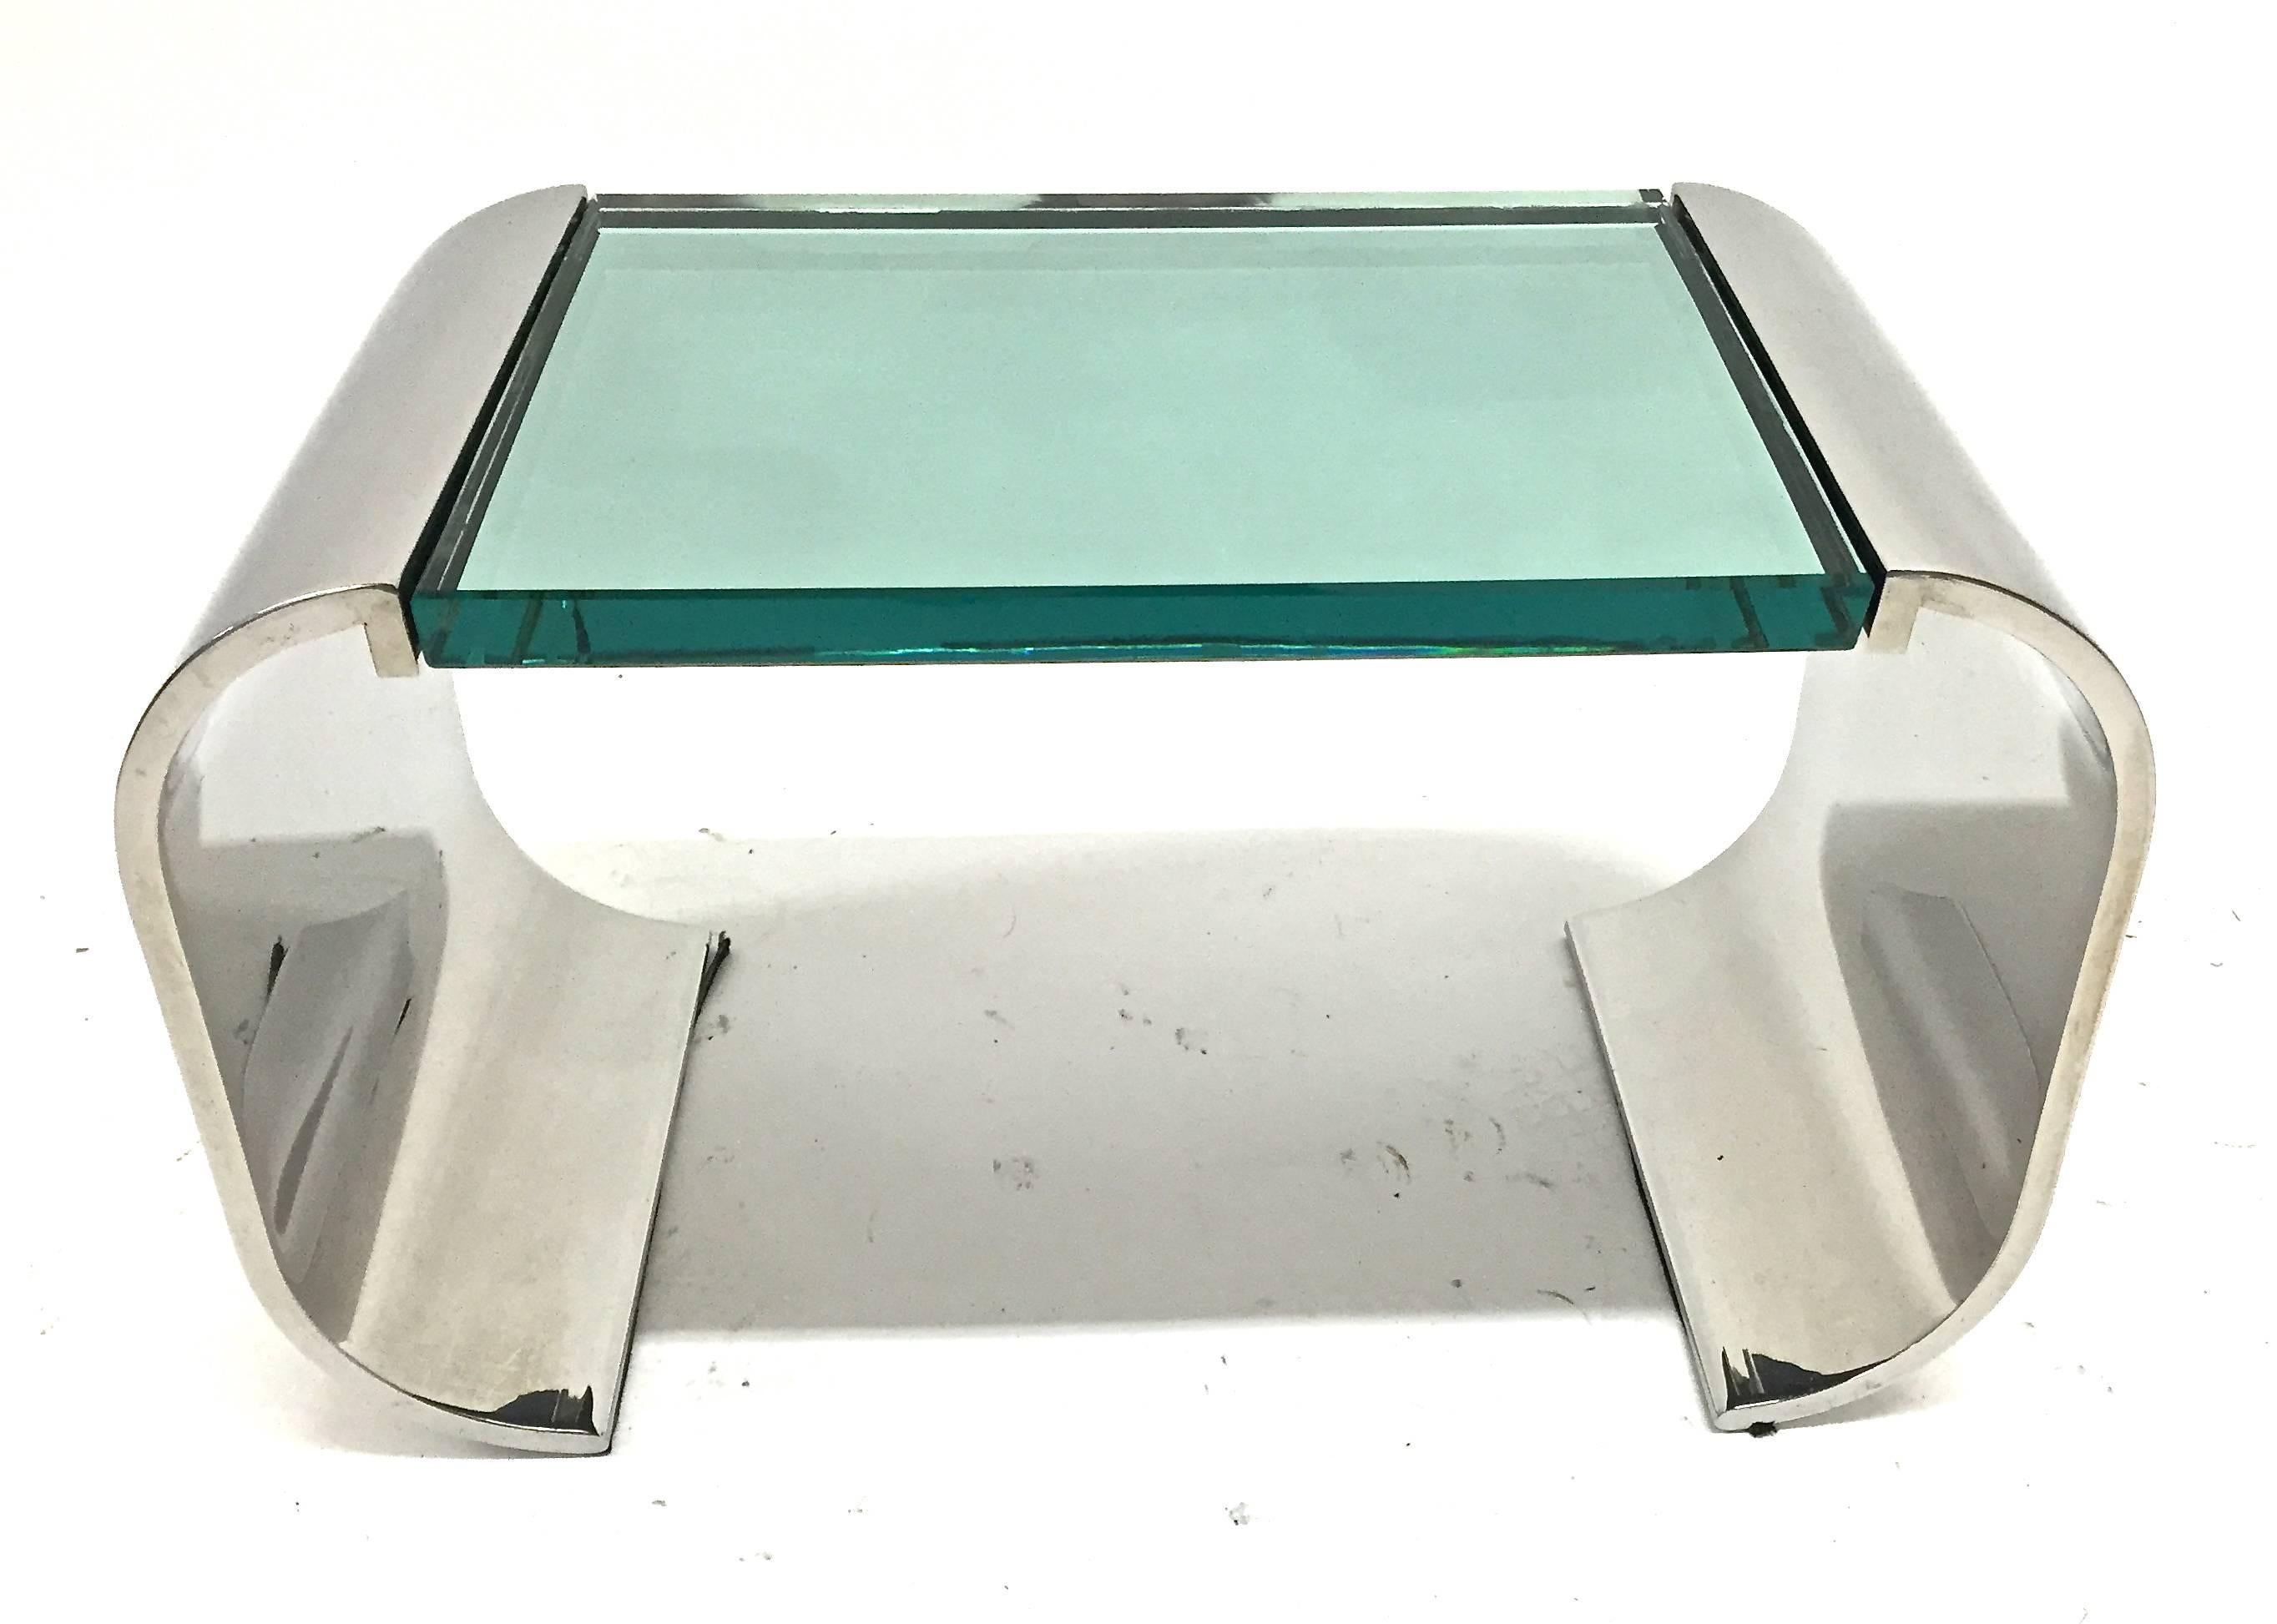 Stanley Jay Friedman for Brueton stainless steel and glass sculptural Macao low table, 1970s.